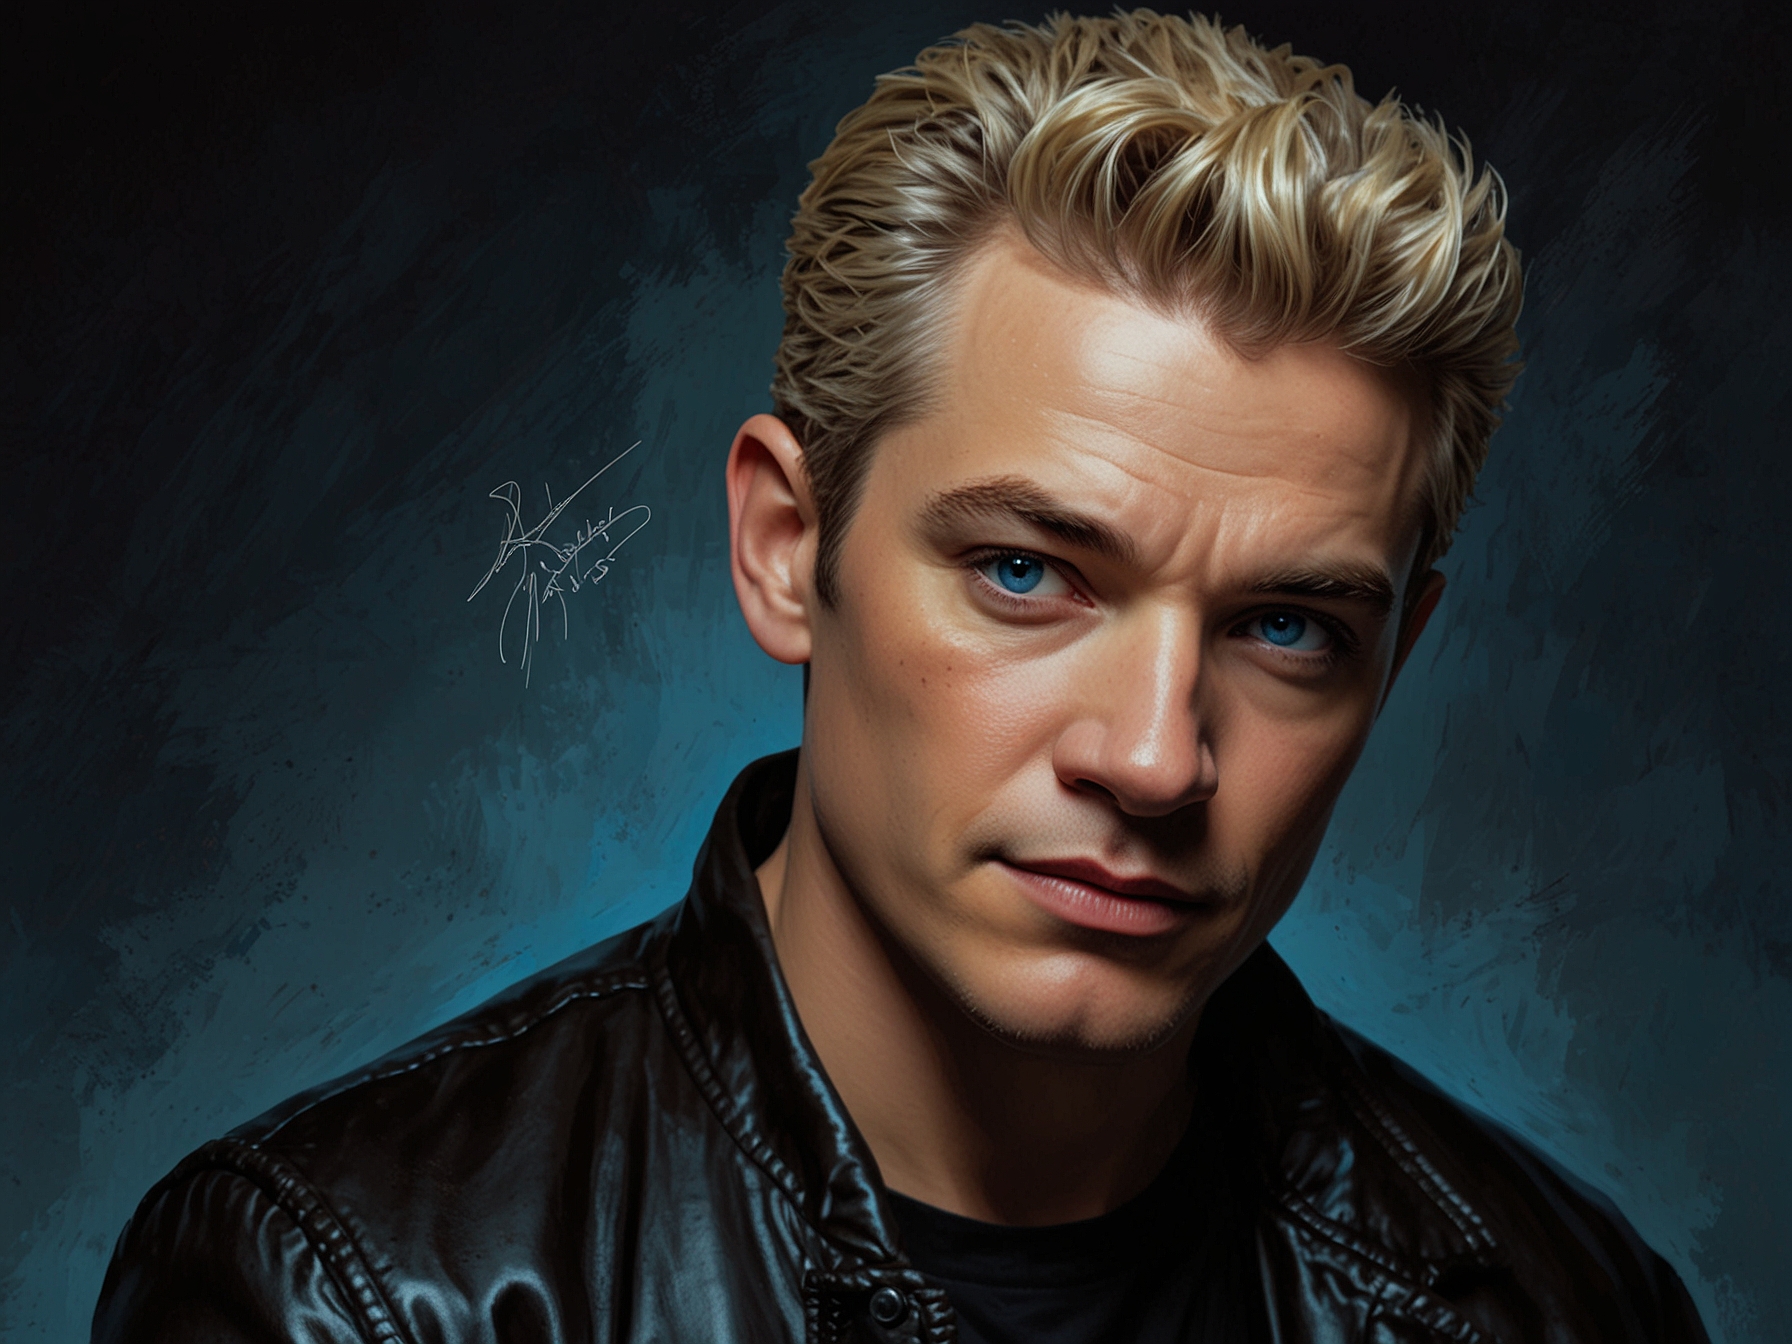 James Marsters as Spike in 'Buffy The Vampire Slayer,' showcasing his iconic look with bleached blonde hair, piercing blue eyes, and signature leather jacket that captivated 90s audiences.